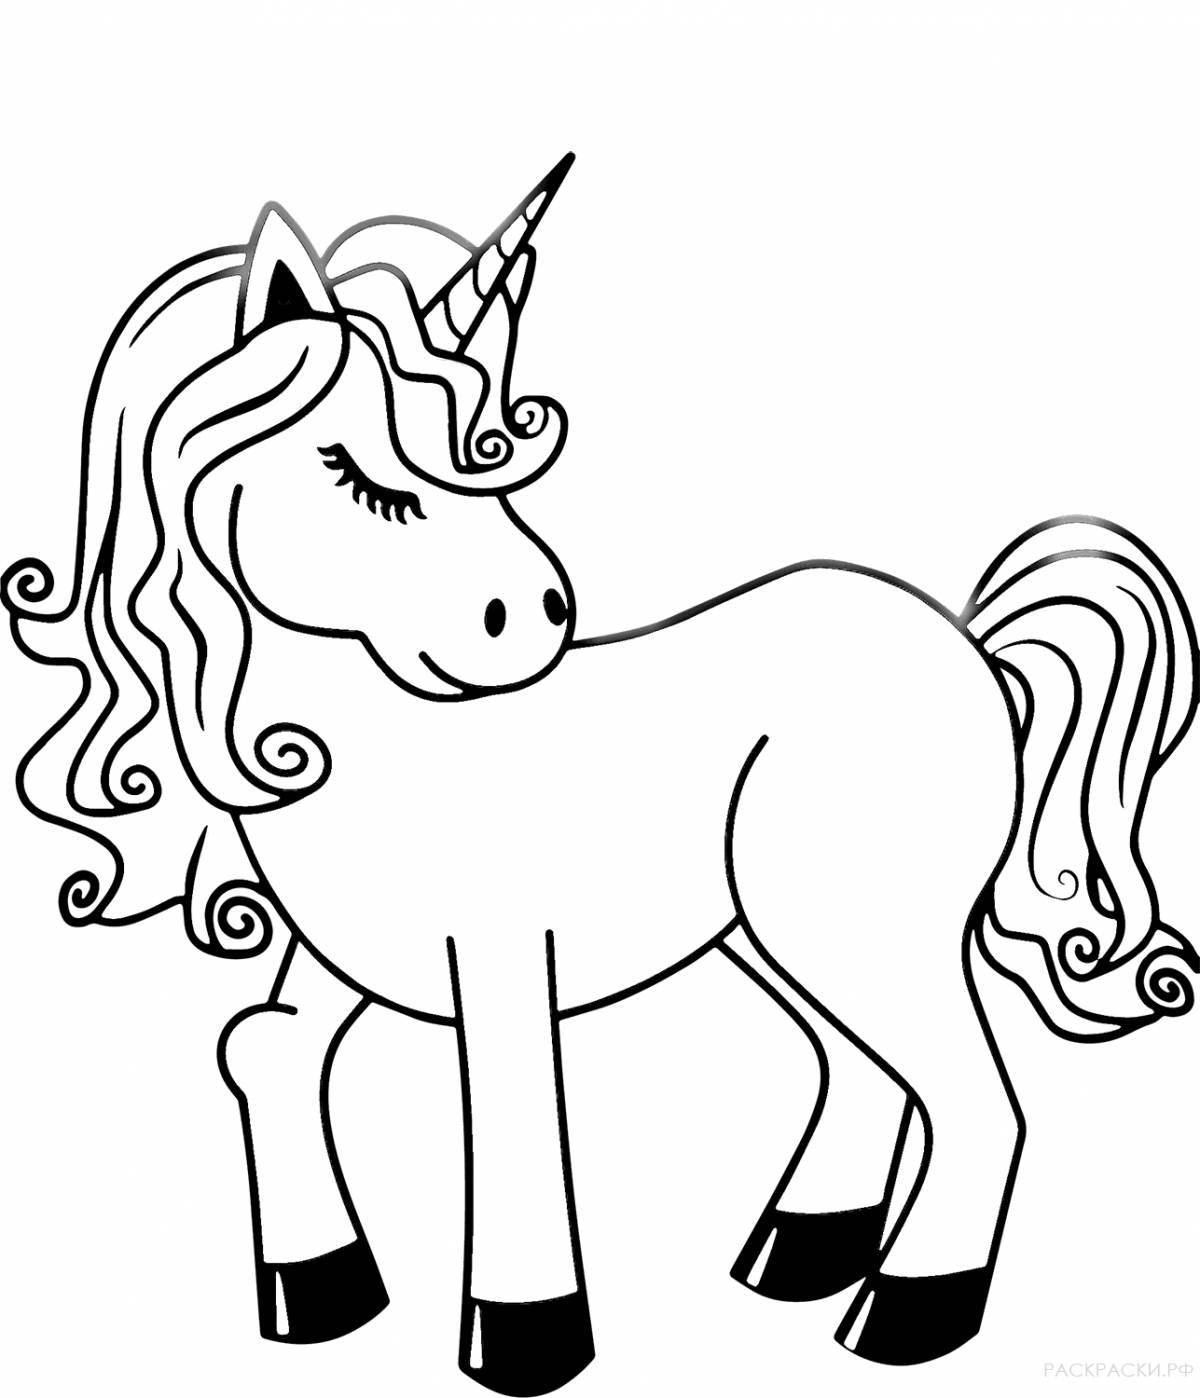 Coloring book for children 5-6 years old for girls unicorns